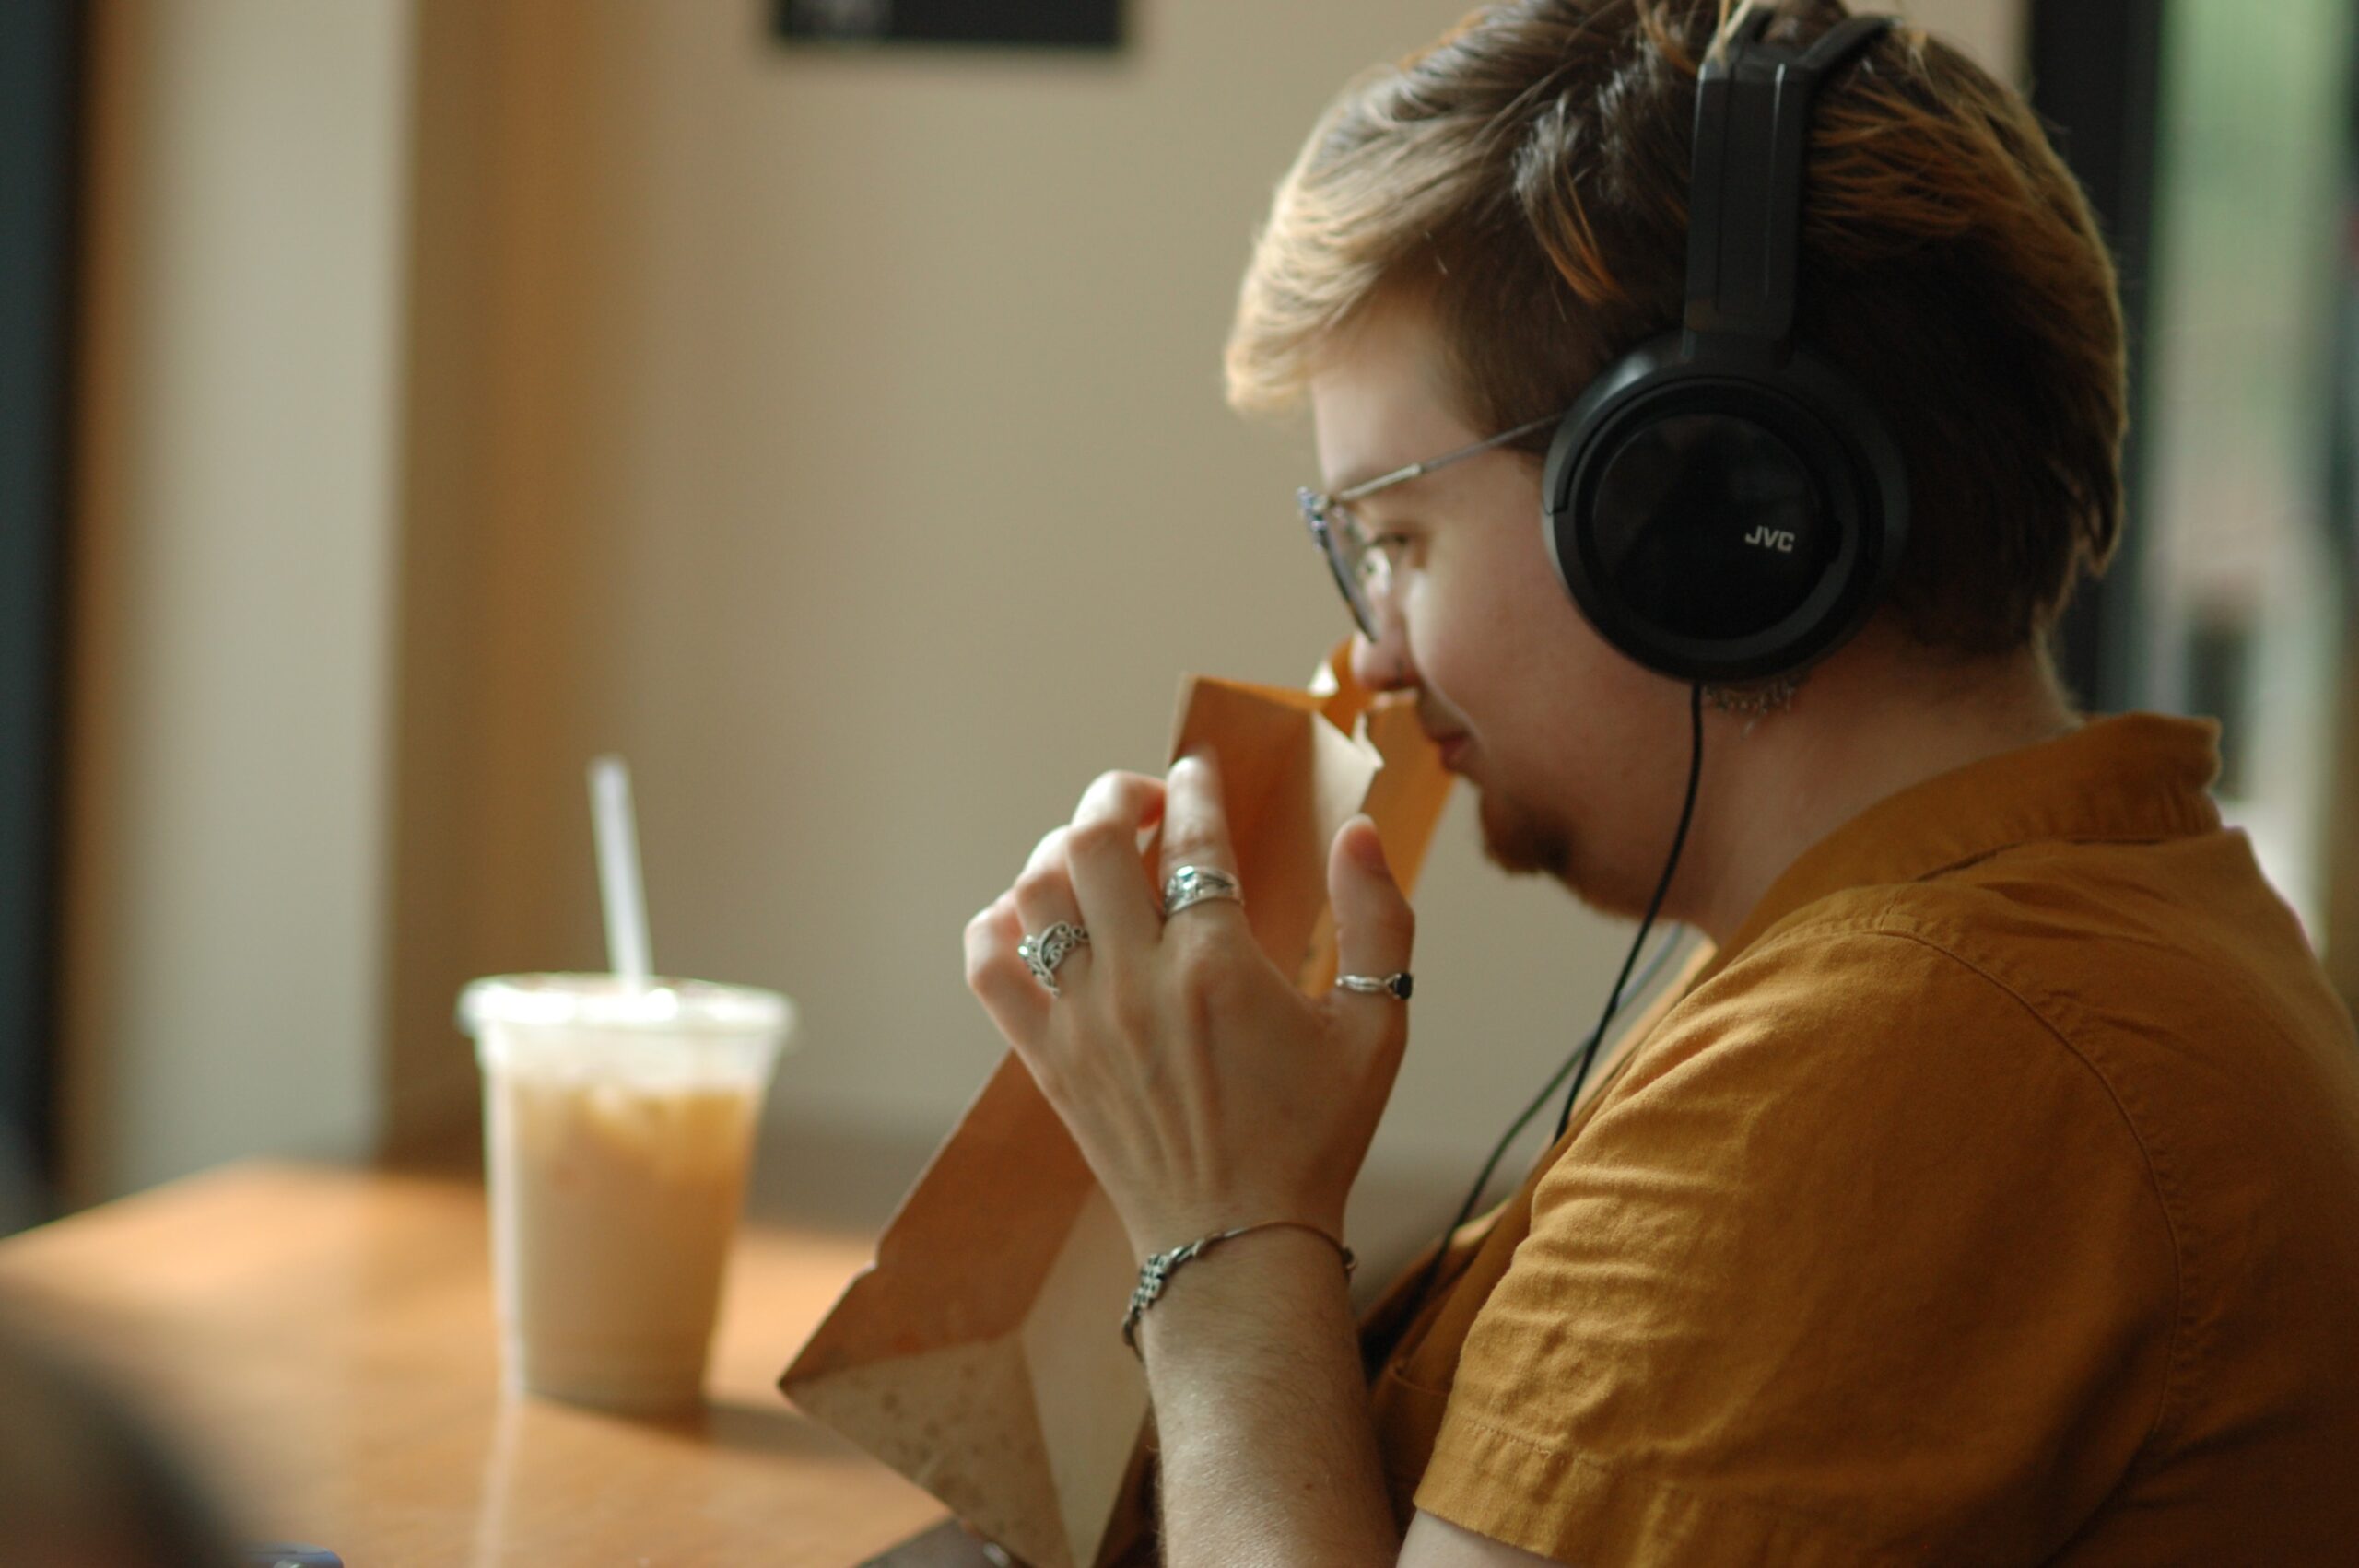 A person sits at a cafe wearing headphones and smells the aroma from a bag of coffee beans